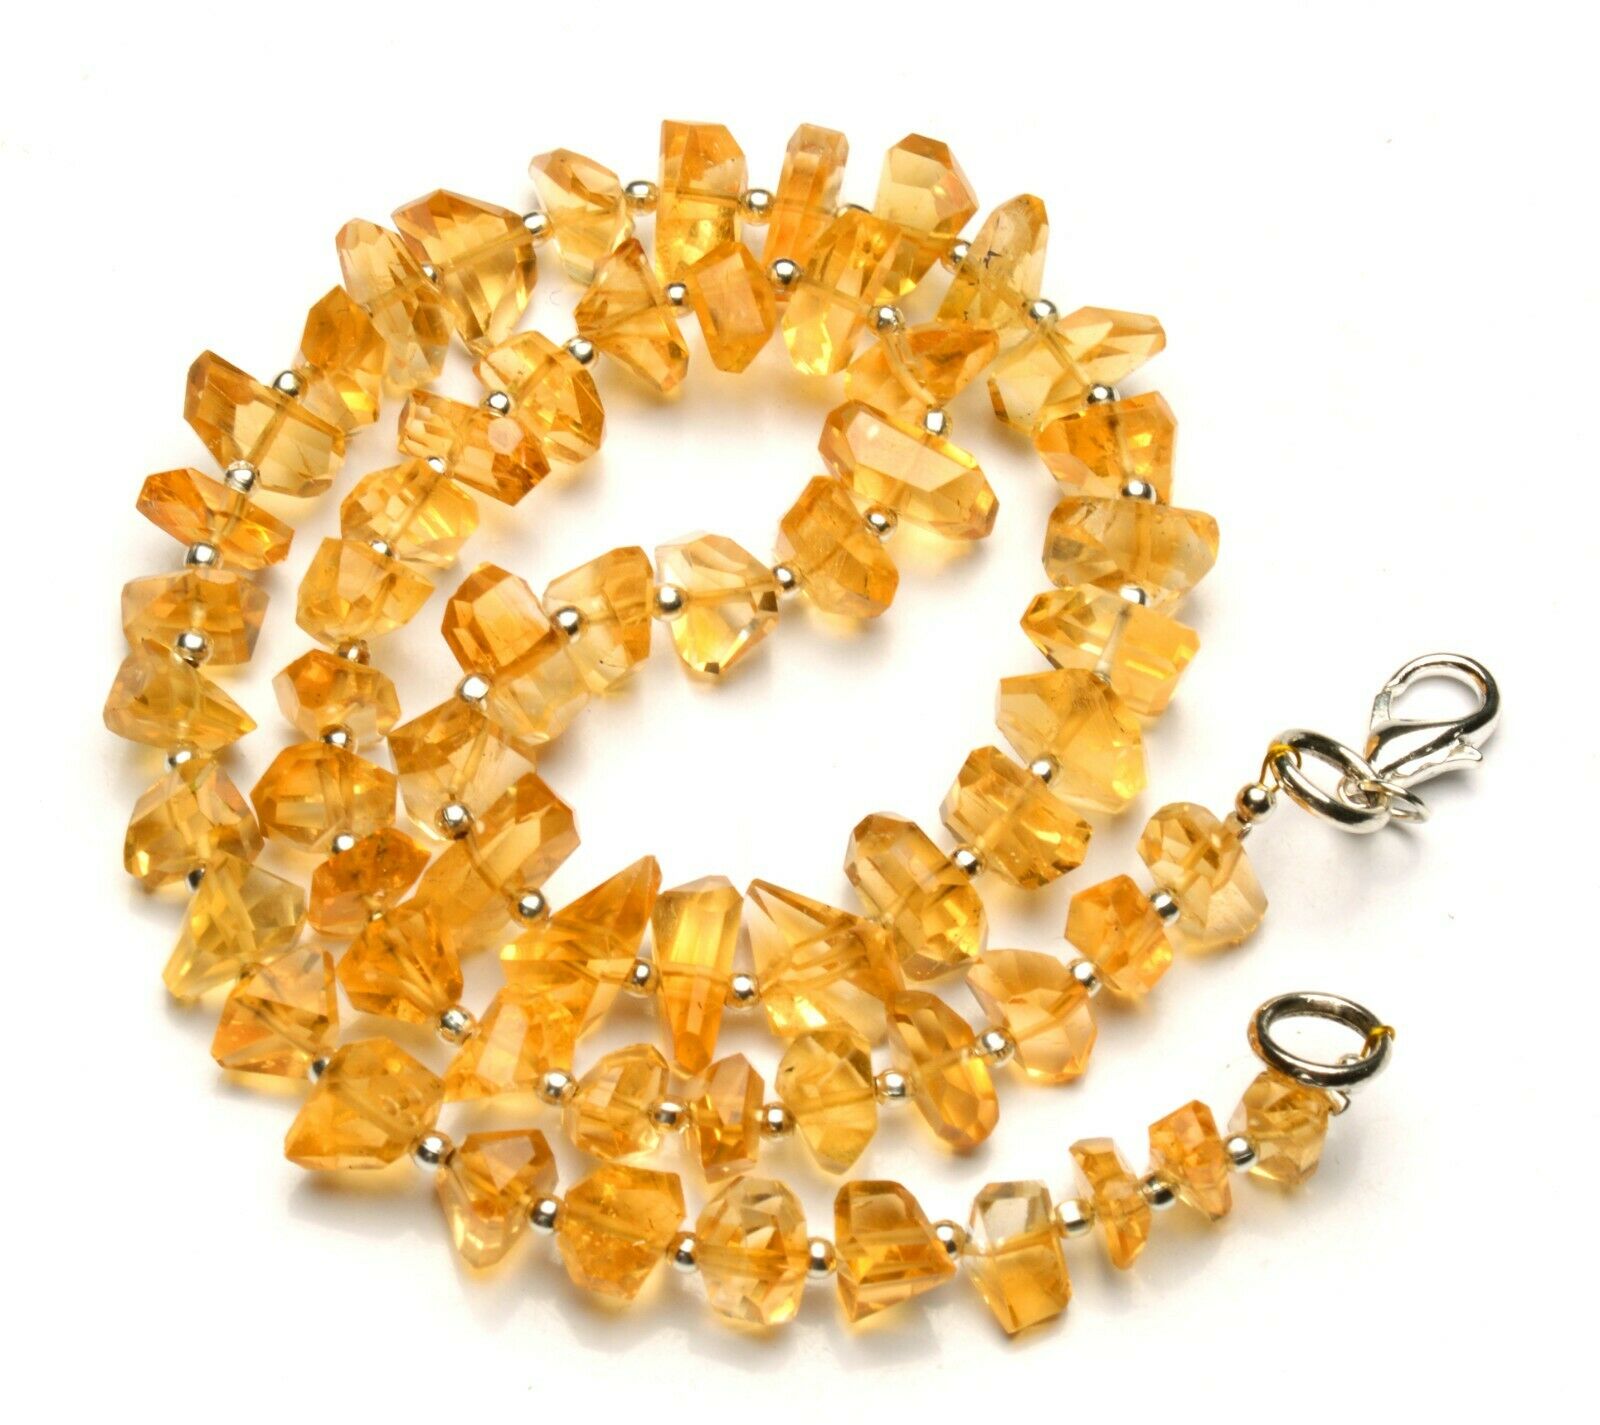 Natural Gem Golden Citrine 7 To 10mm Size Faceted Nugget Beads Necklace 17"